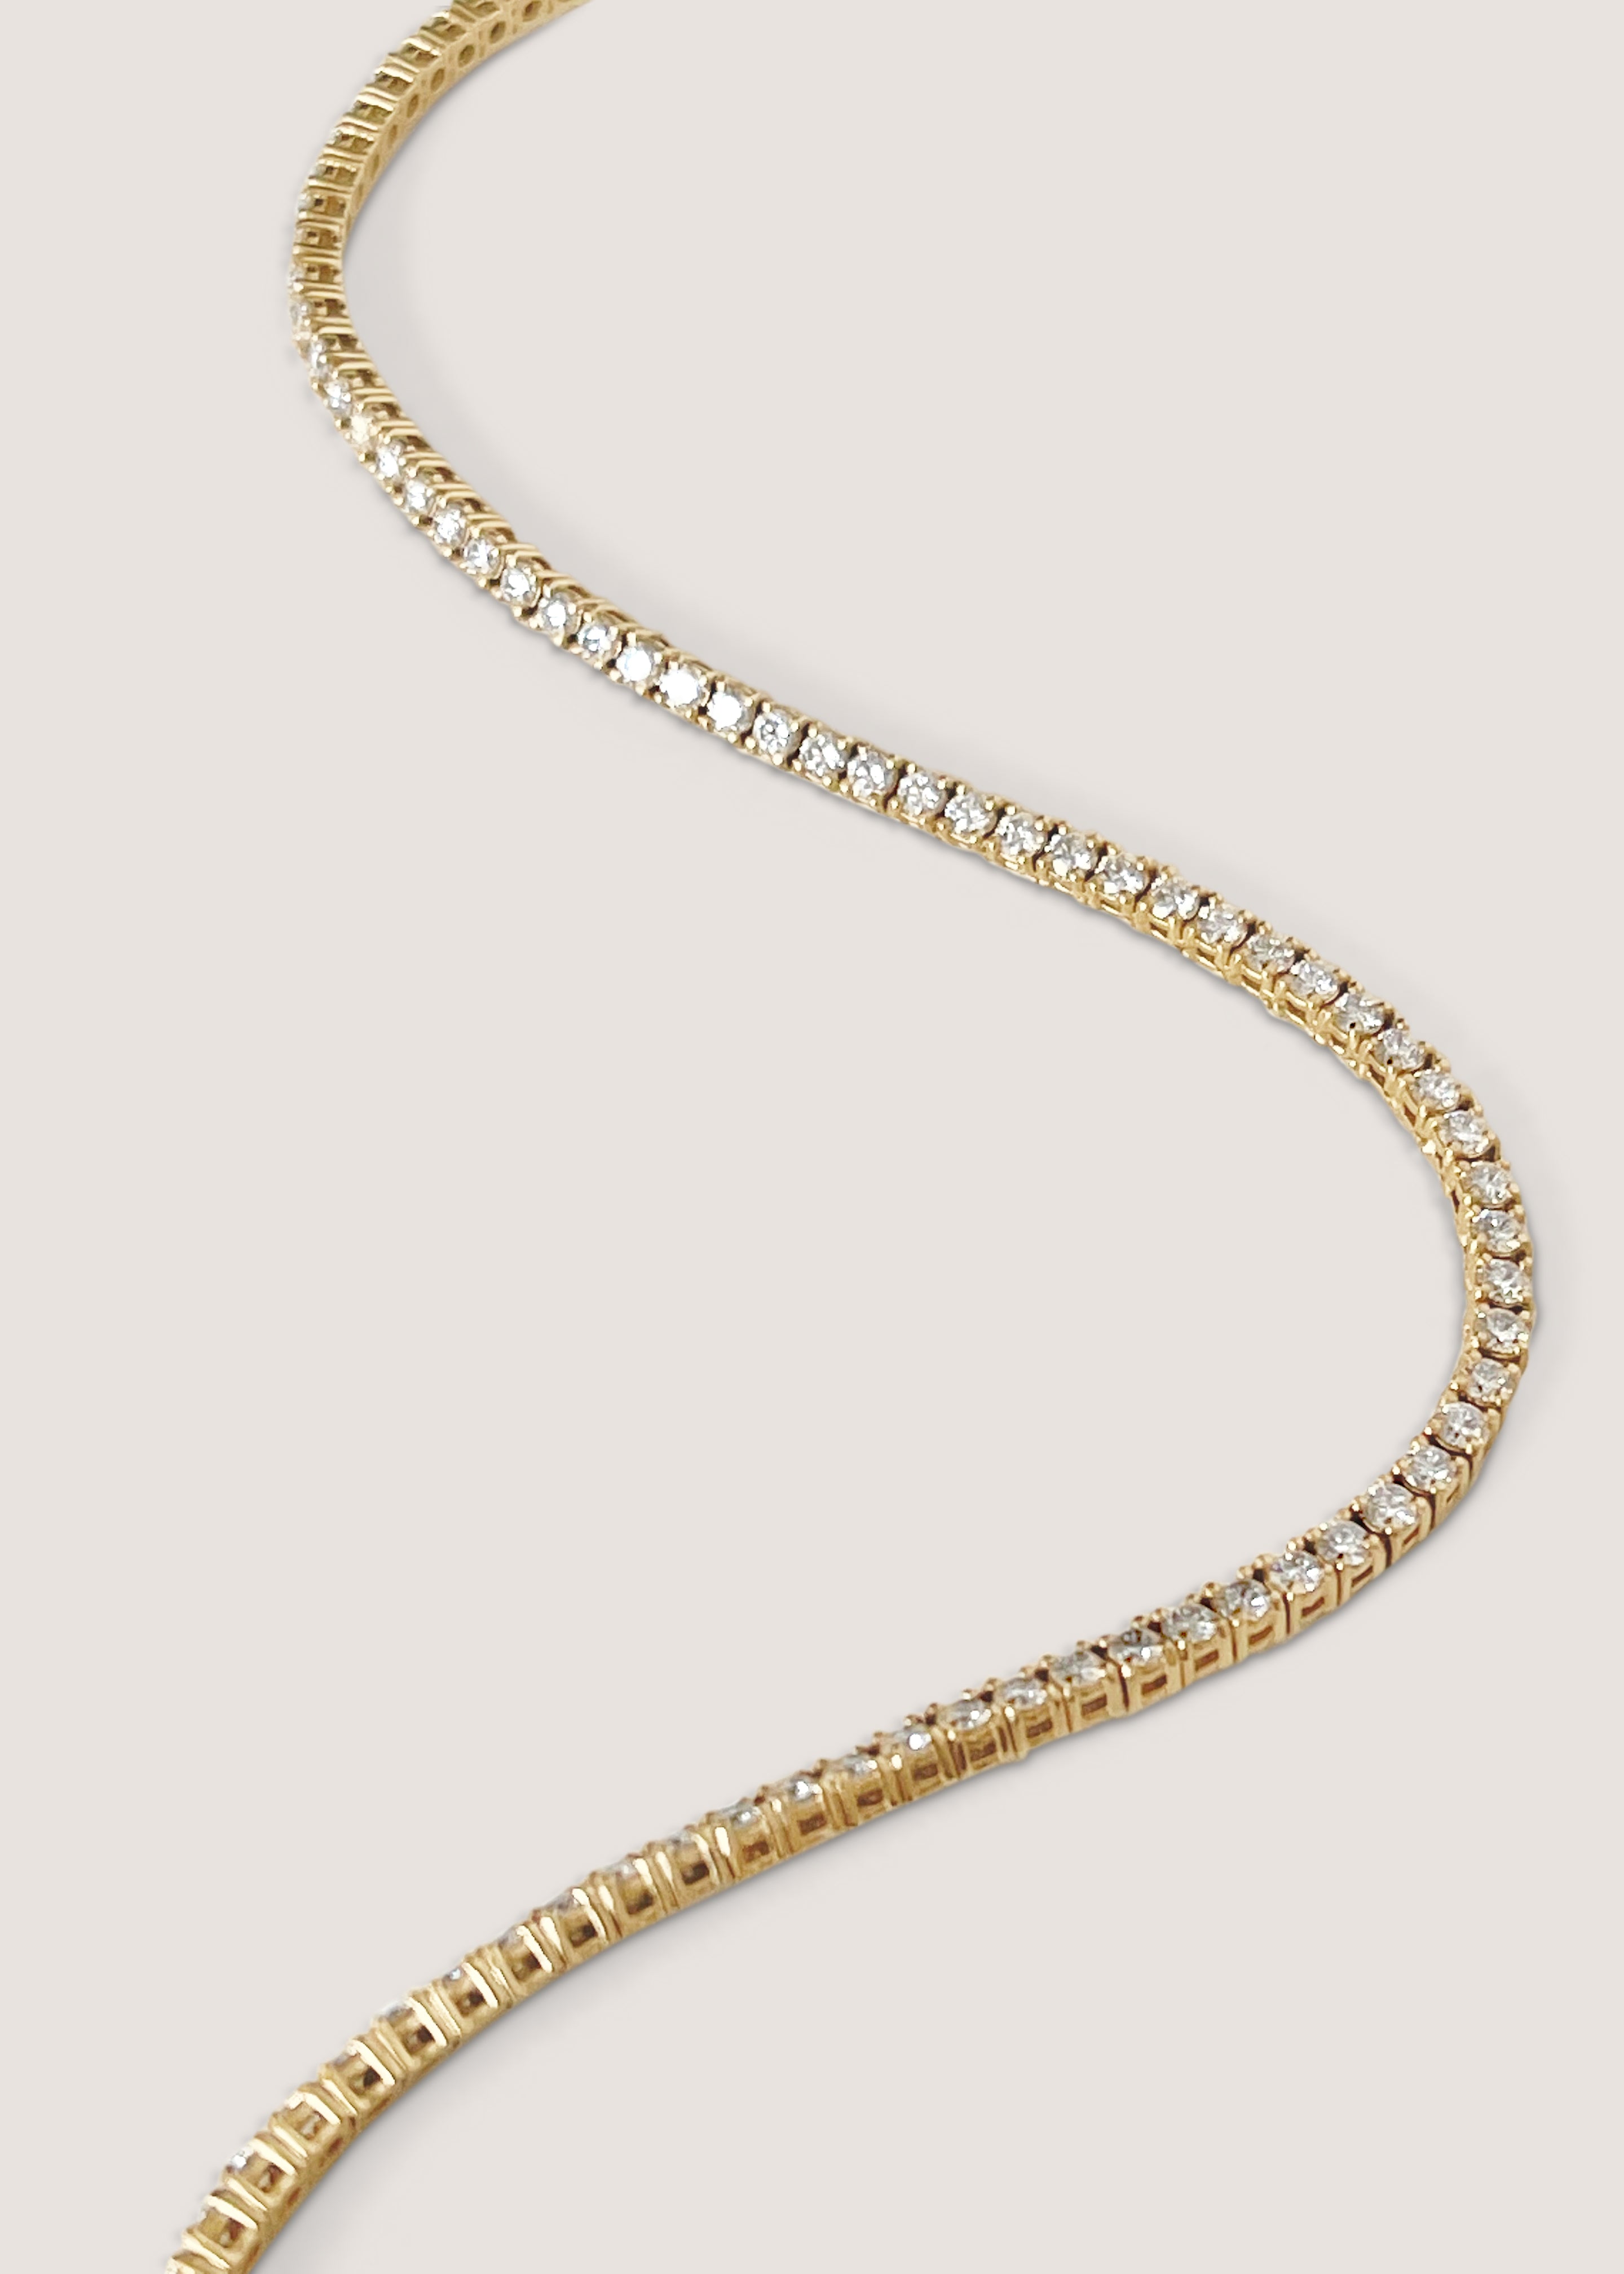 Buy Tennis Chain Necklace Solid 14k Yellow Gold 2.1mm Round Cut Tennis  Chain Necklace Online in India - Etsy